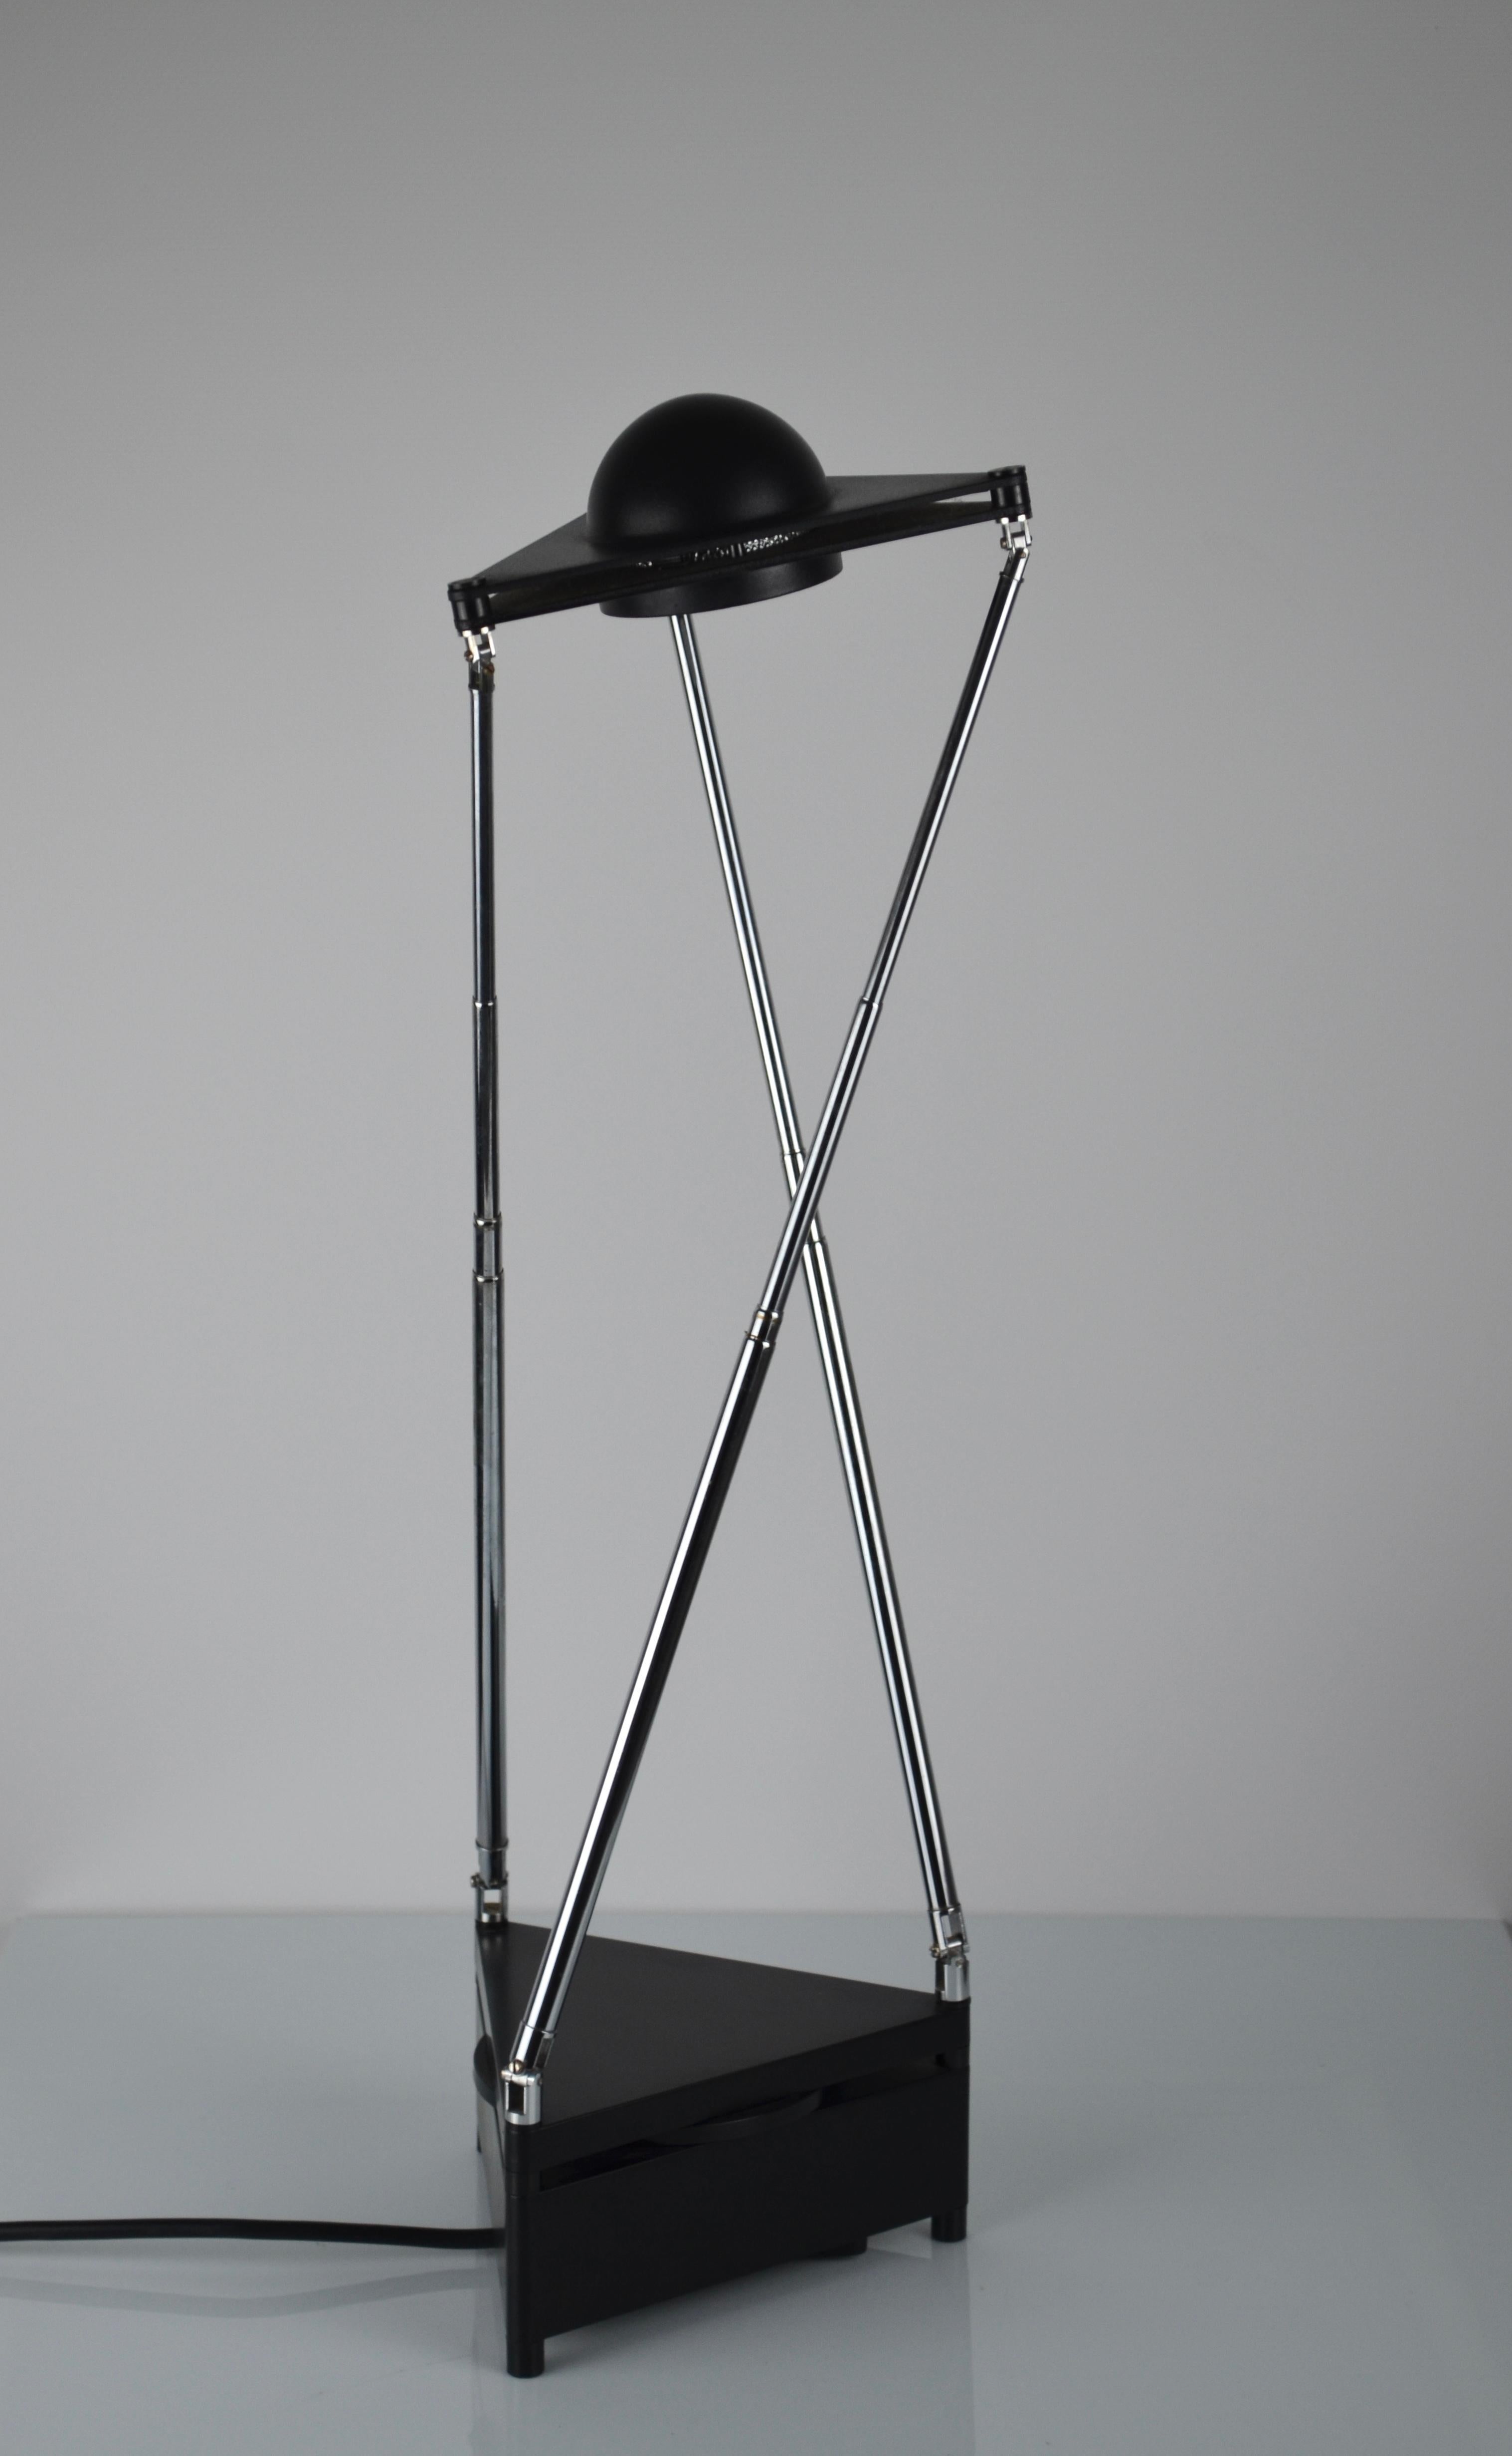 Kandido lamp by Ferdinand Alexander Porsche for Luci, with 3 telescopic extendable antenna arms in chrome
Design from the 1980s
Many possible positions
Can have 2 light intensities
Adjustable height from 33 to 83 cm